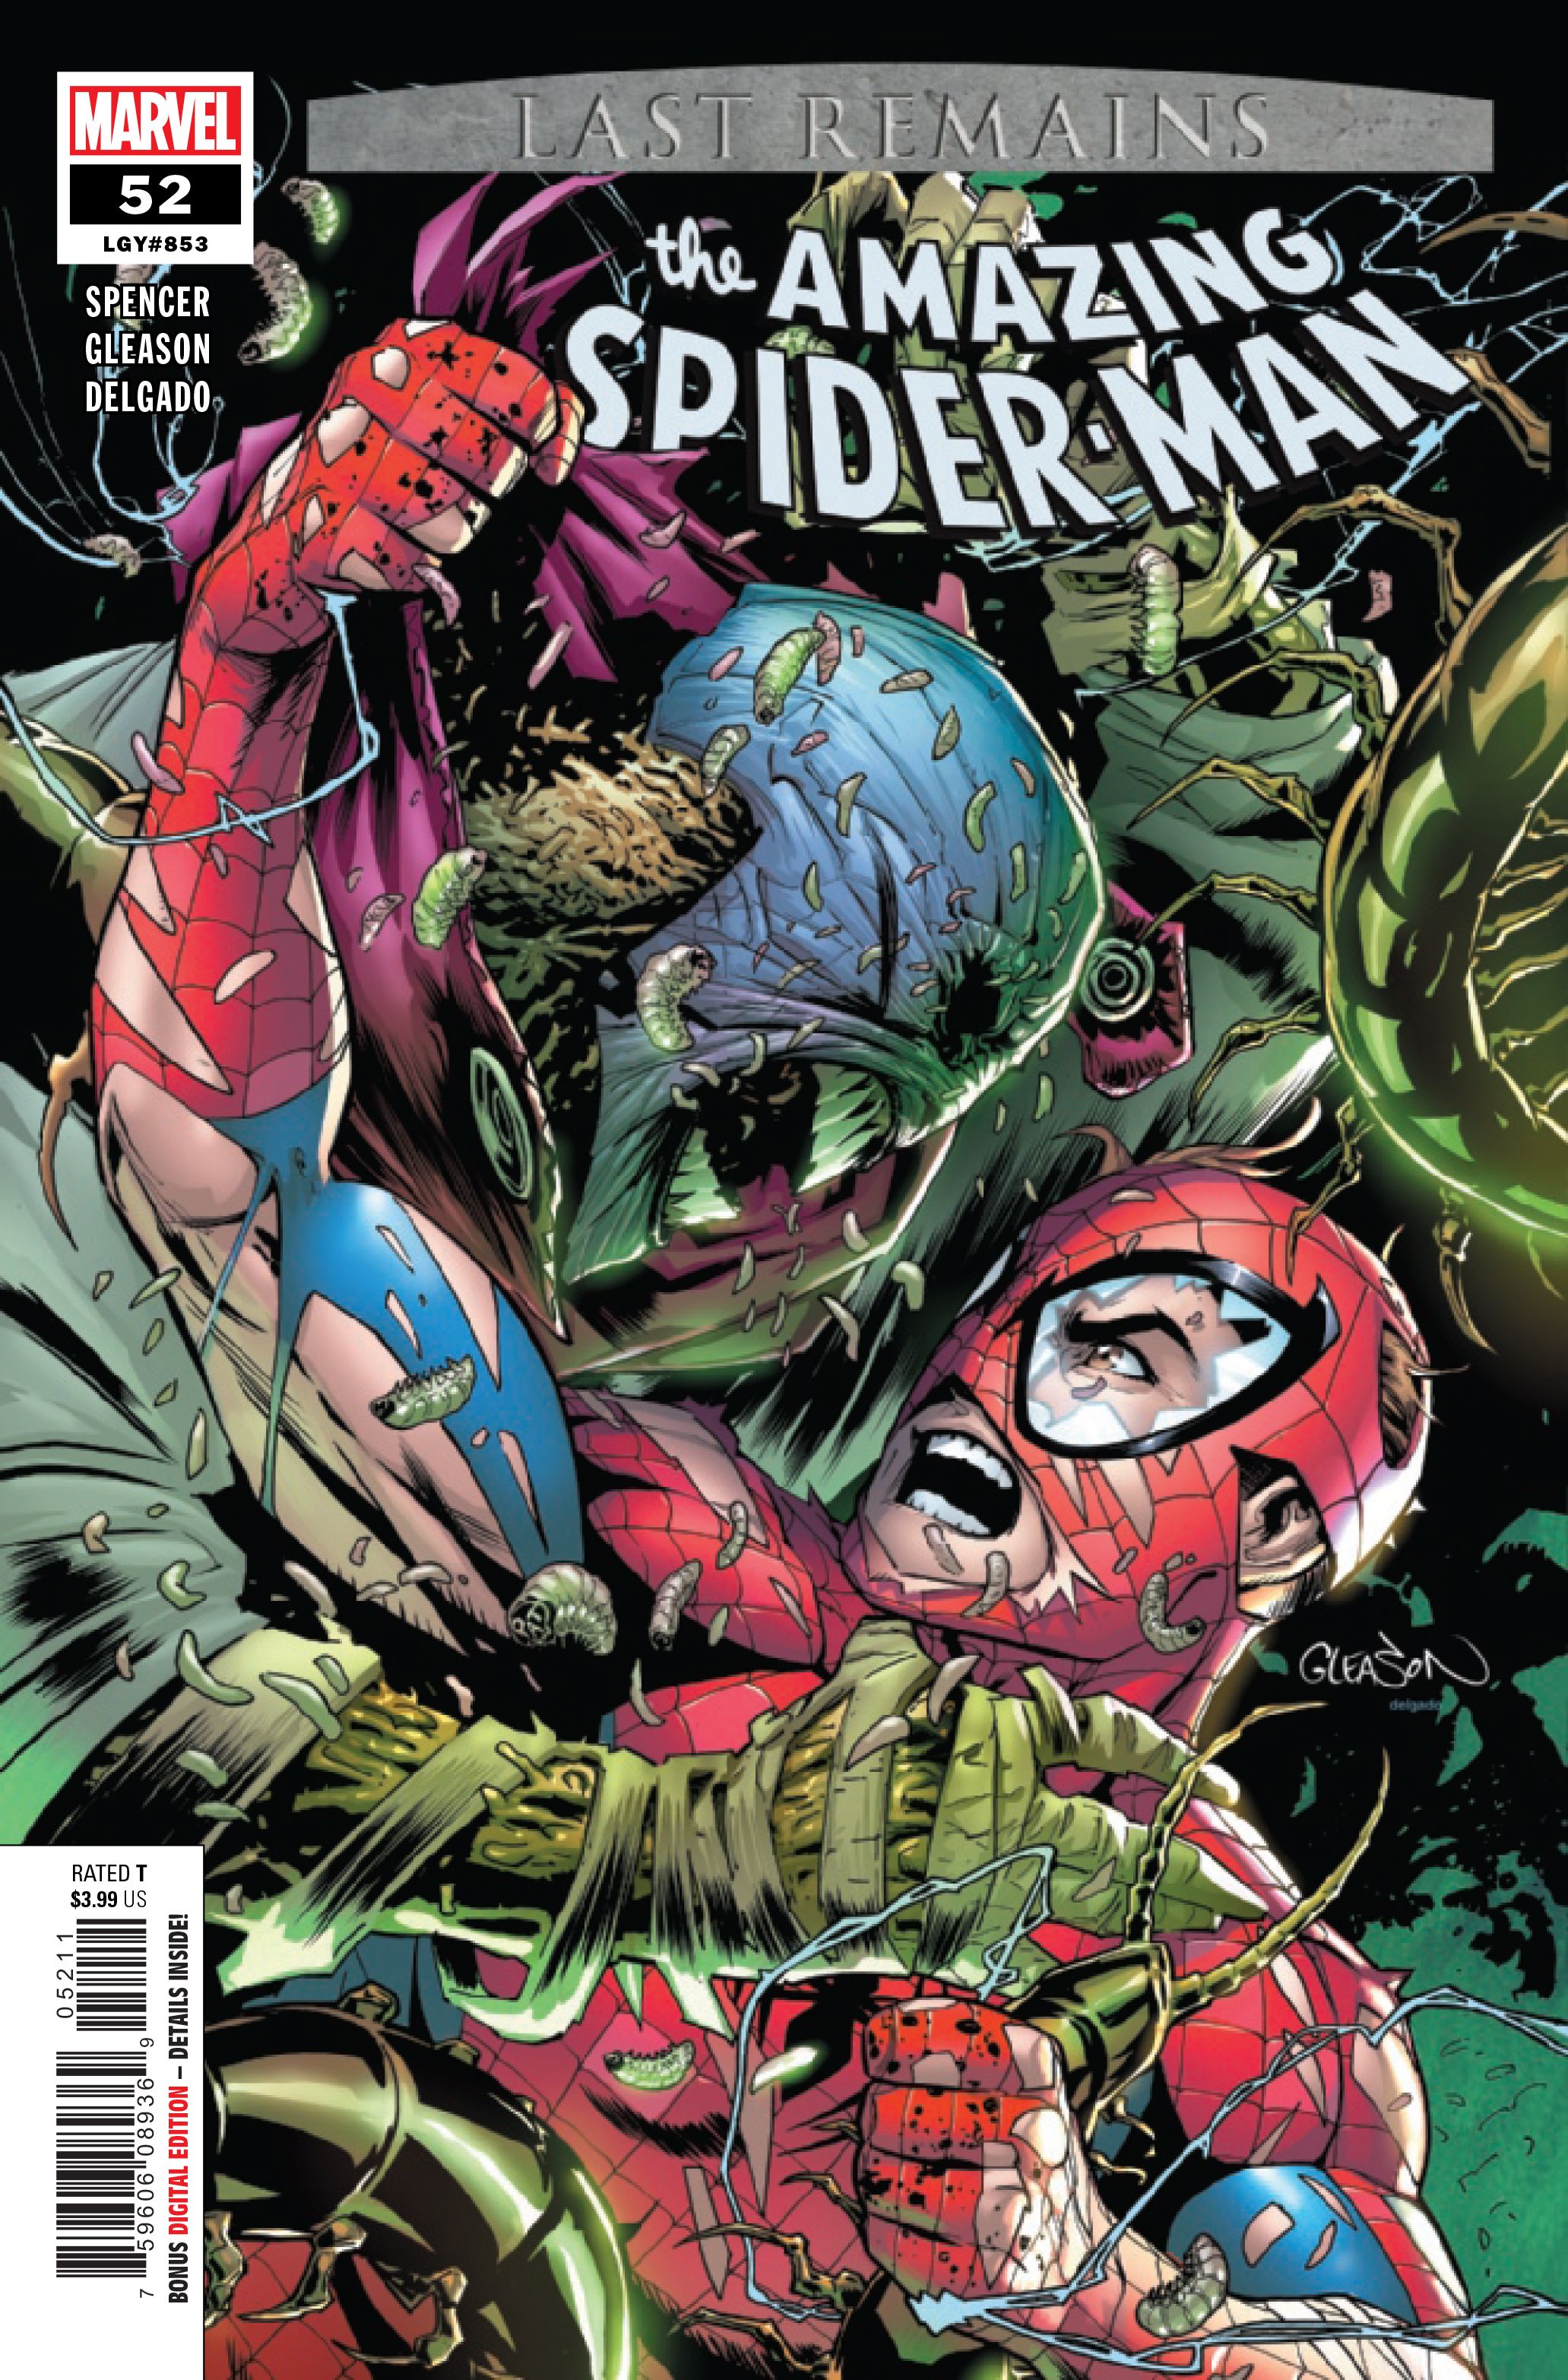 Patrick Gleason and Edgar Delgado's cover for The Amazing Spider-Man #52, by Nick Spencer, Patrick Gleason, Edgar Delgado and VC's Joe Caramagna. 